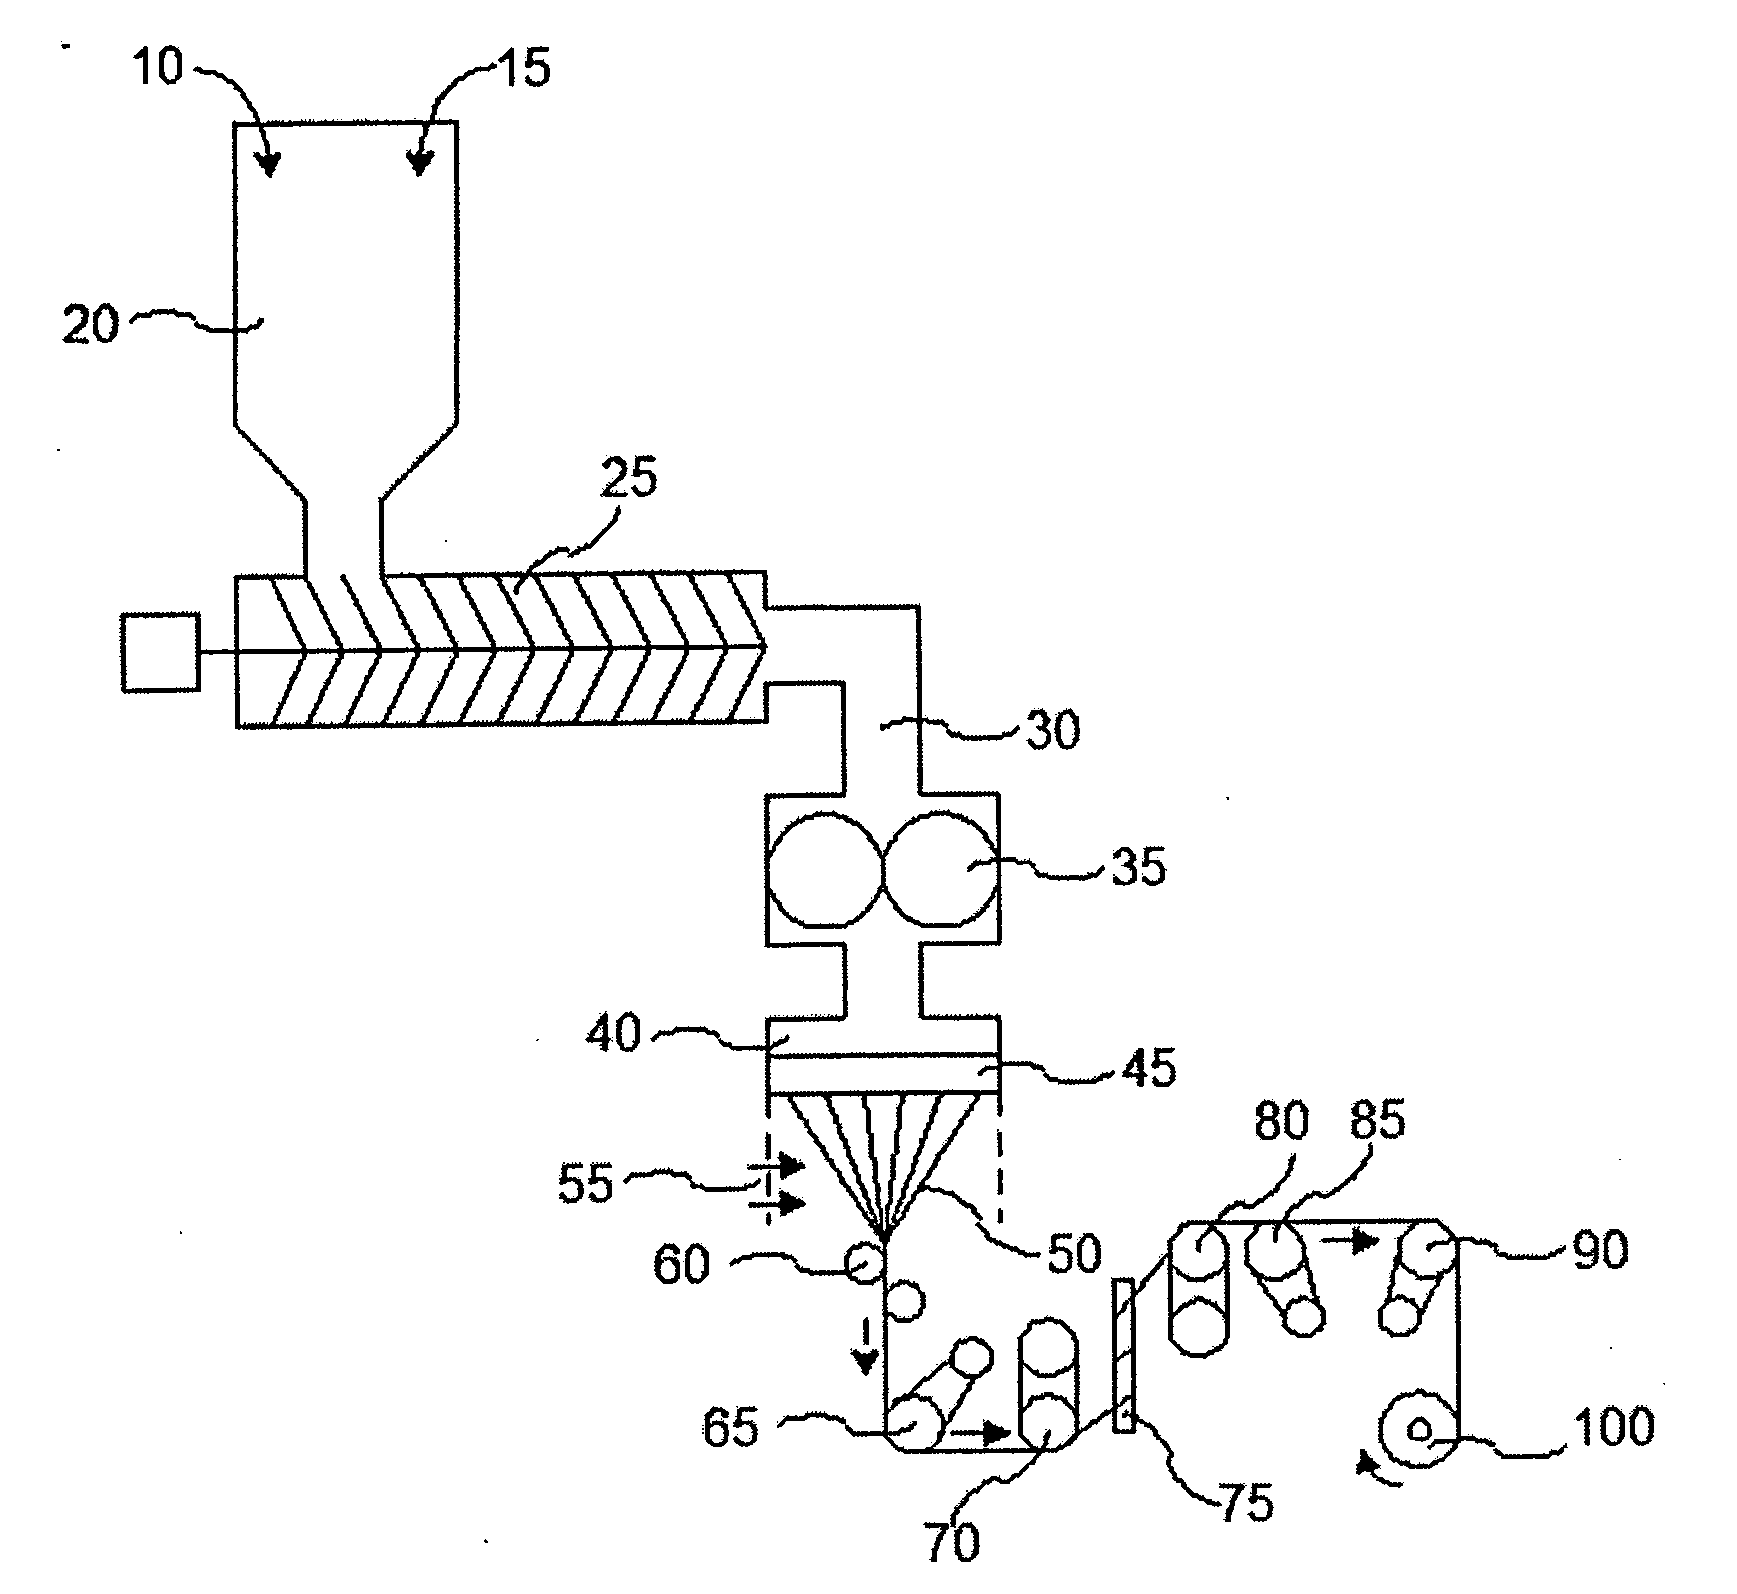 Polymer fibers, fabrics and equipment with a modified near infrared reflectance signature